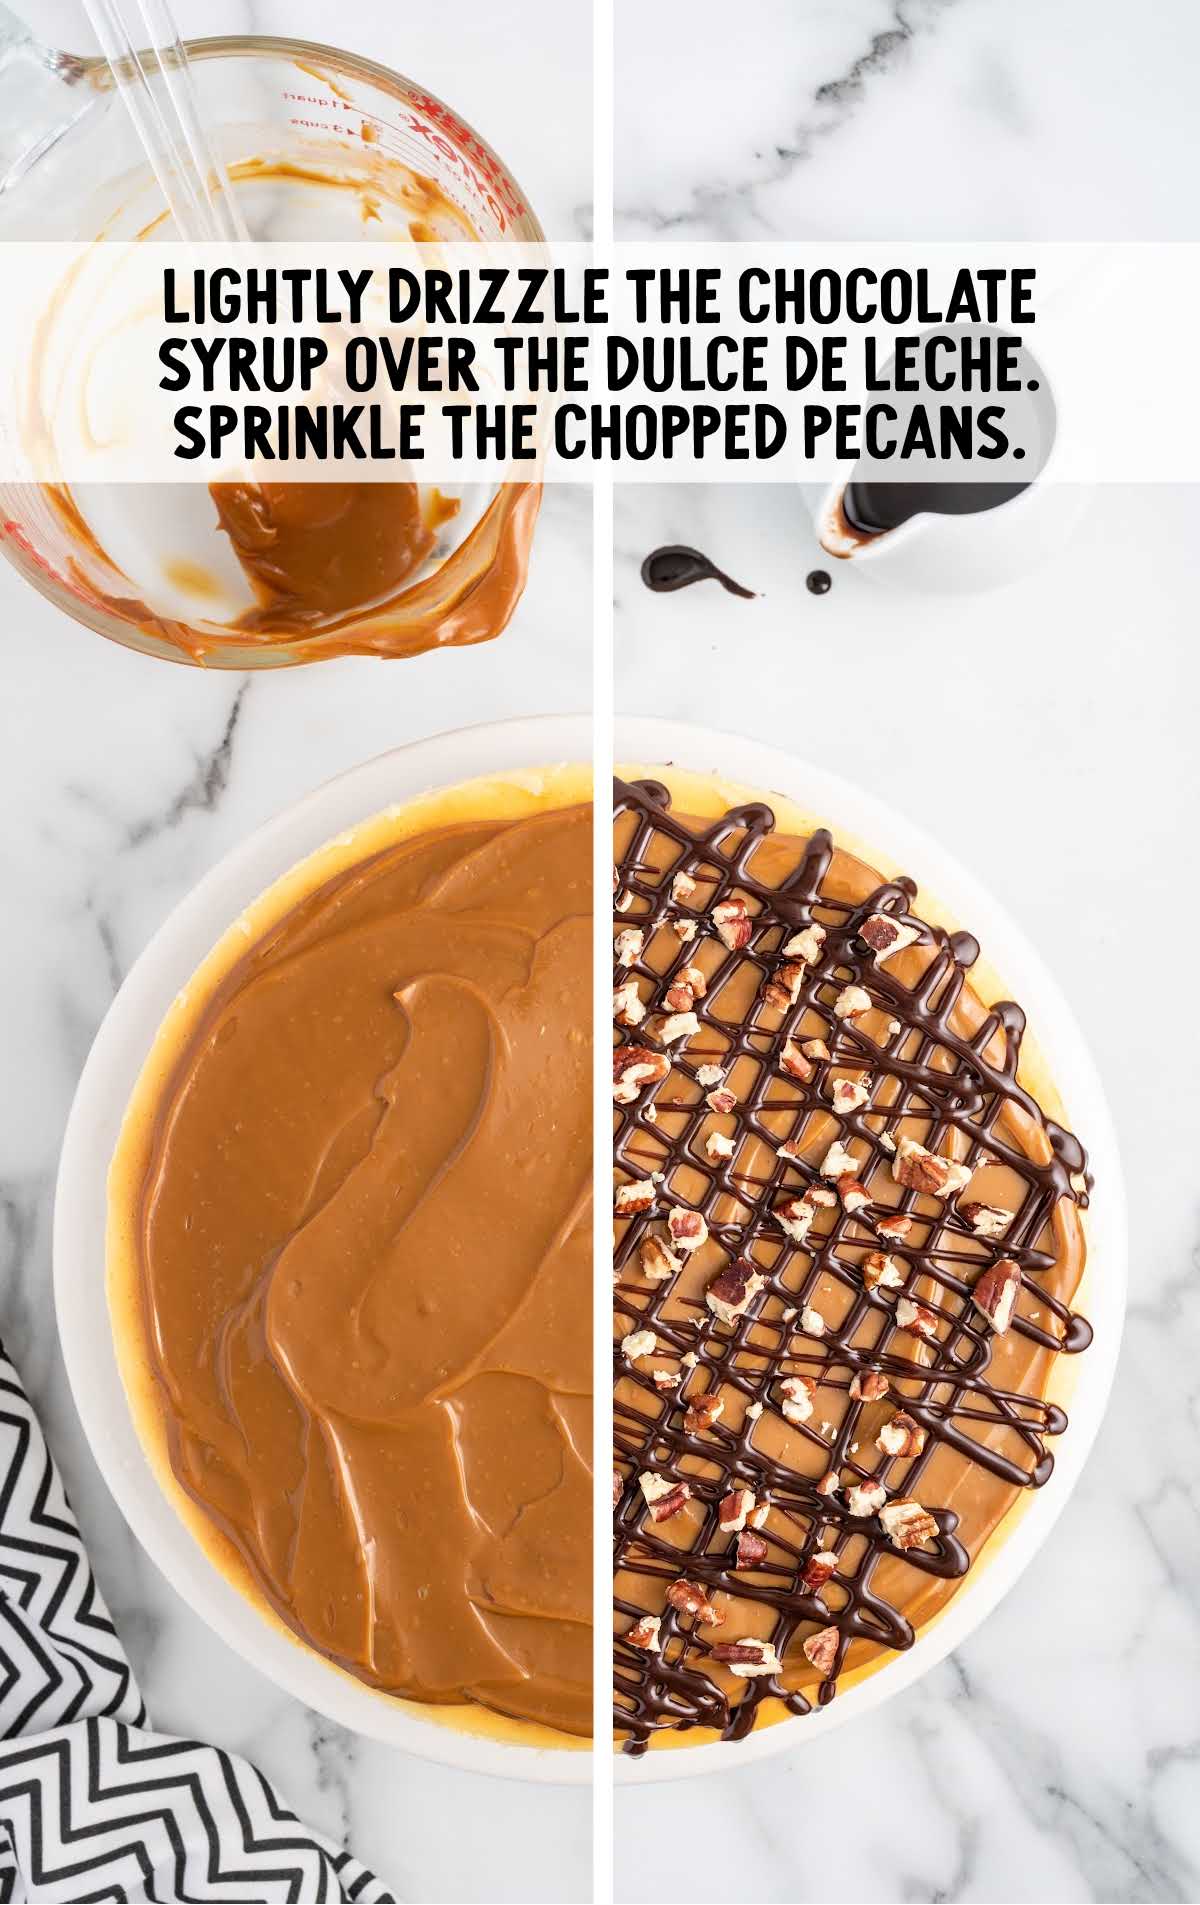 chocolate syrup drizzled over the dulce de leche and sprinkle chopped pecans